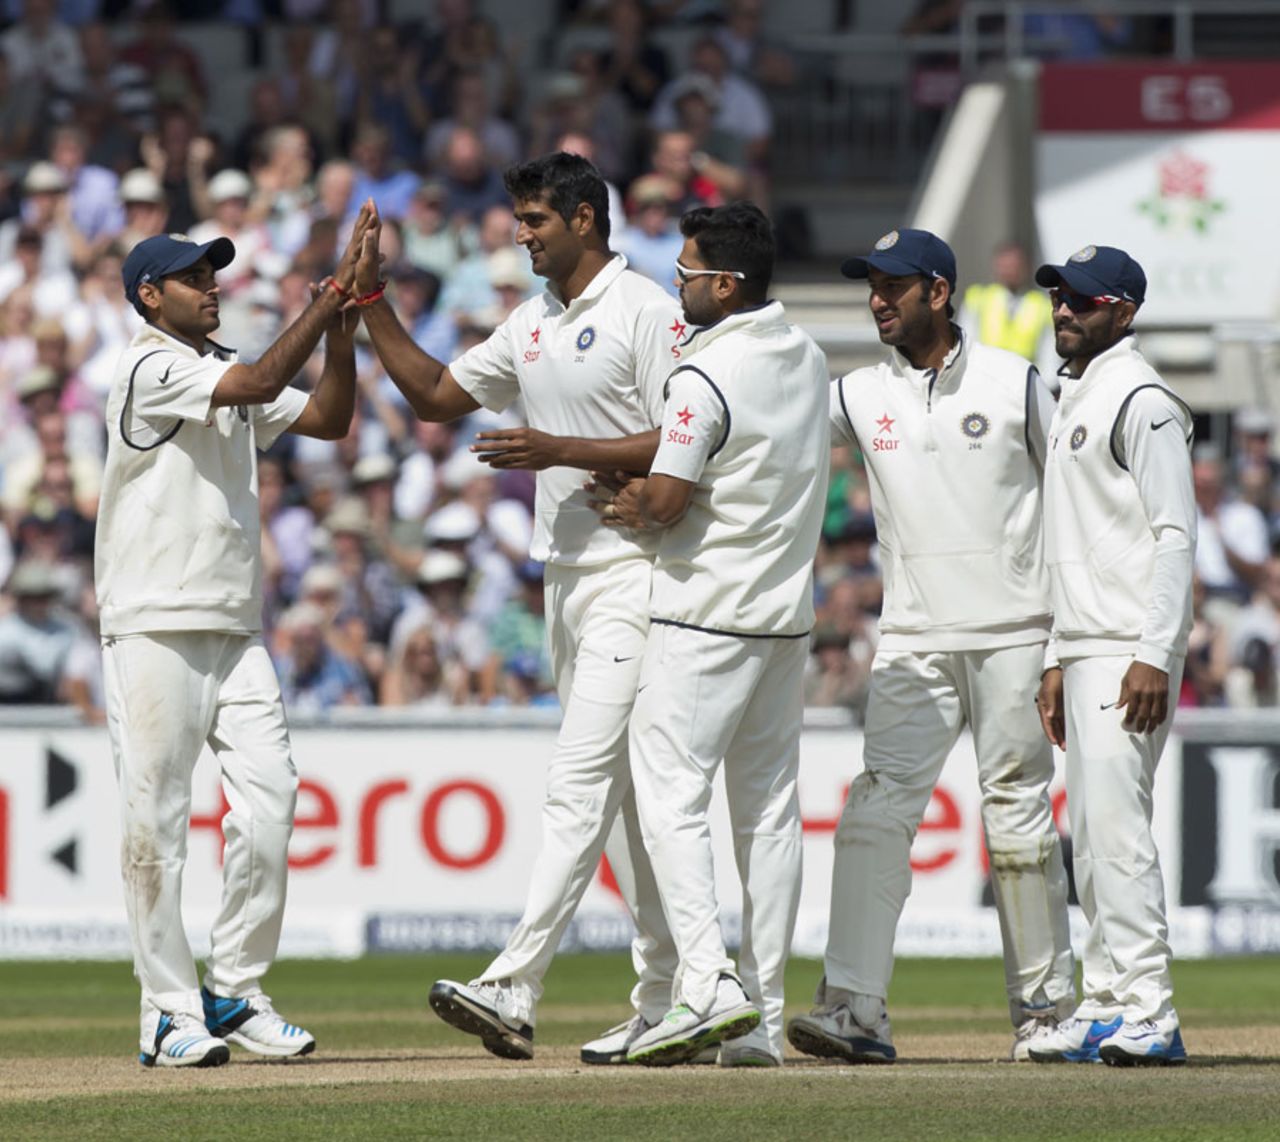 Pankaj Singh is congratulated after his first Test wicket, England v India, 4th Test, Old Trafford, 3rd day, August 9, 2014